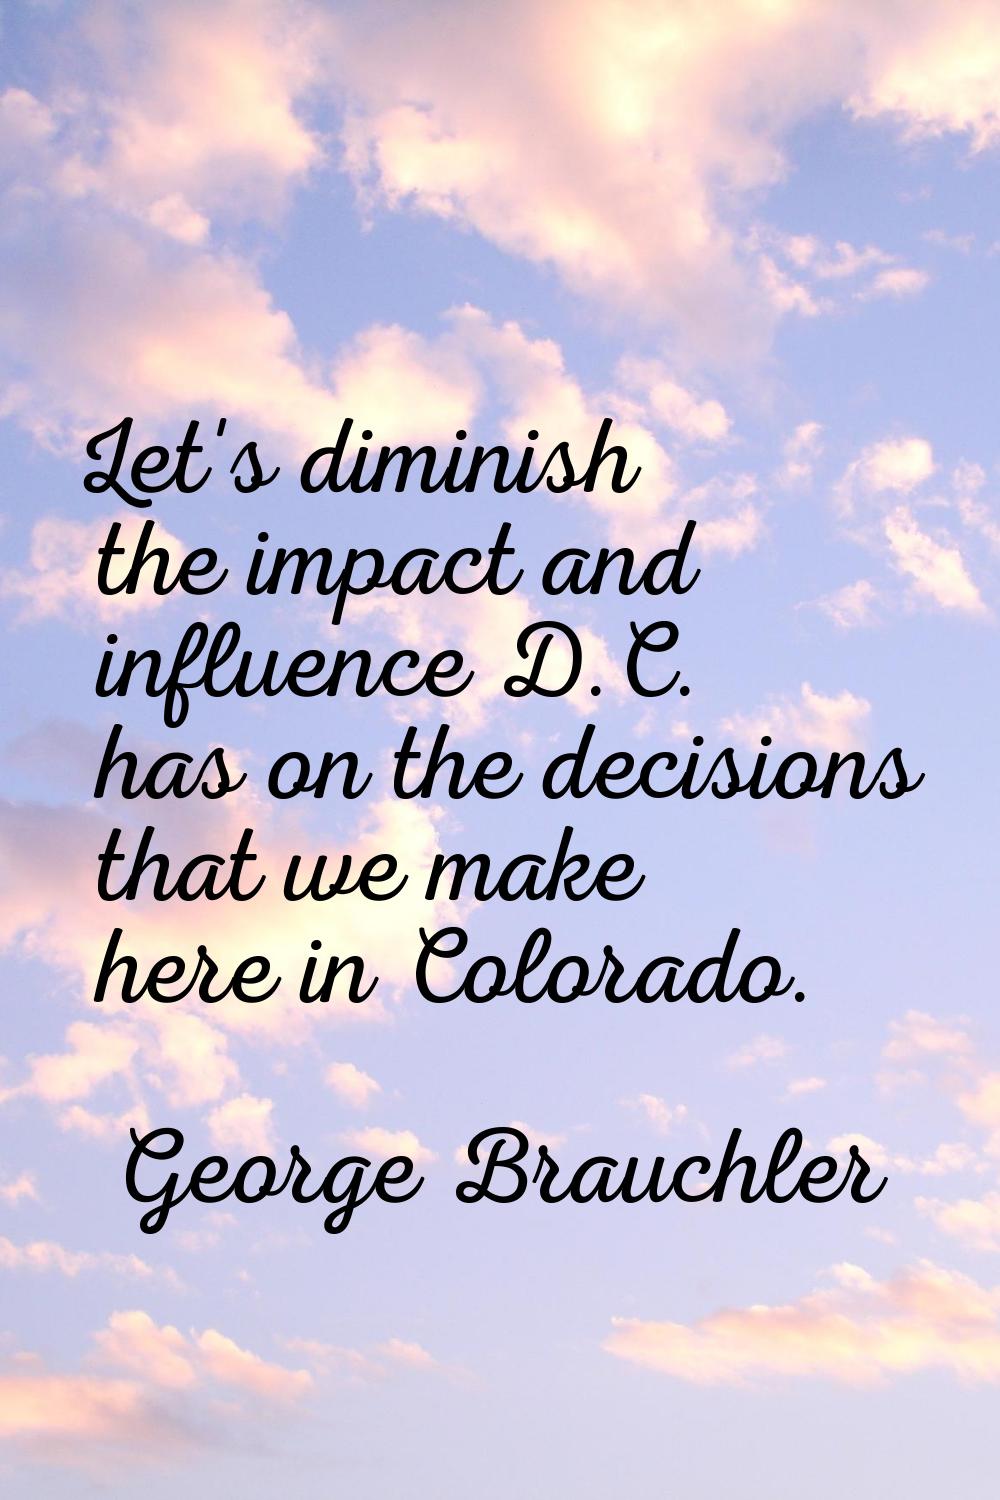 Let's diminish the impact and influence D.C. has on the decisions that we make here in Colorado.